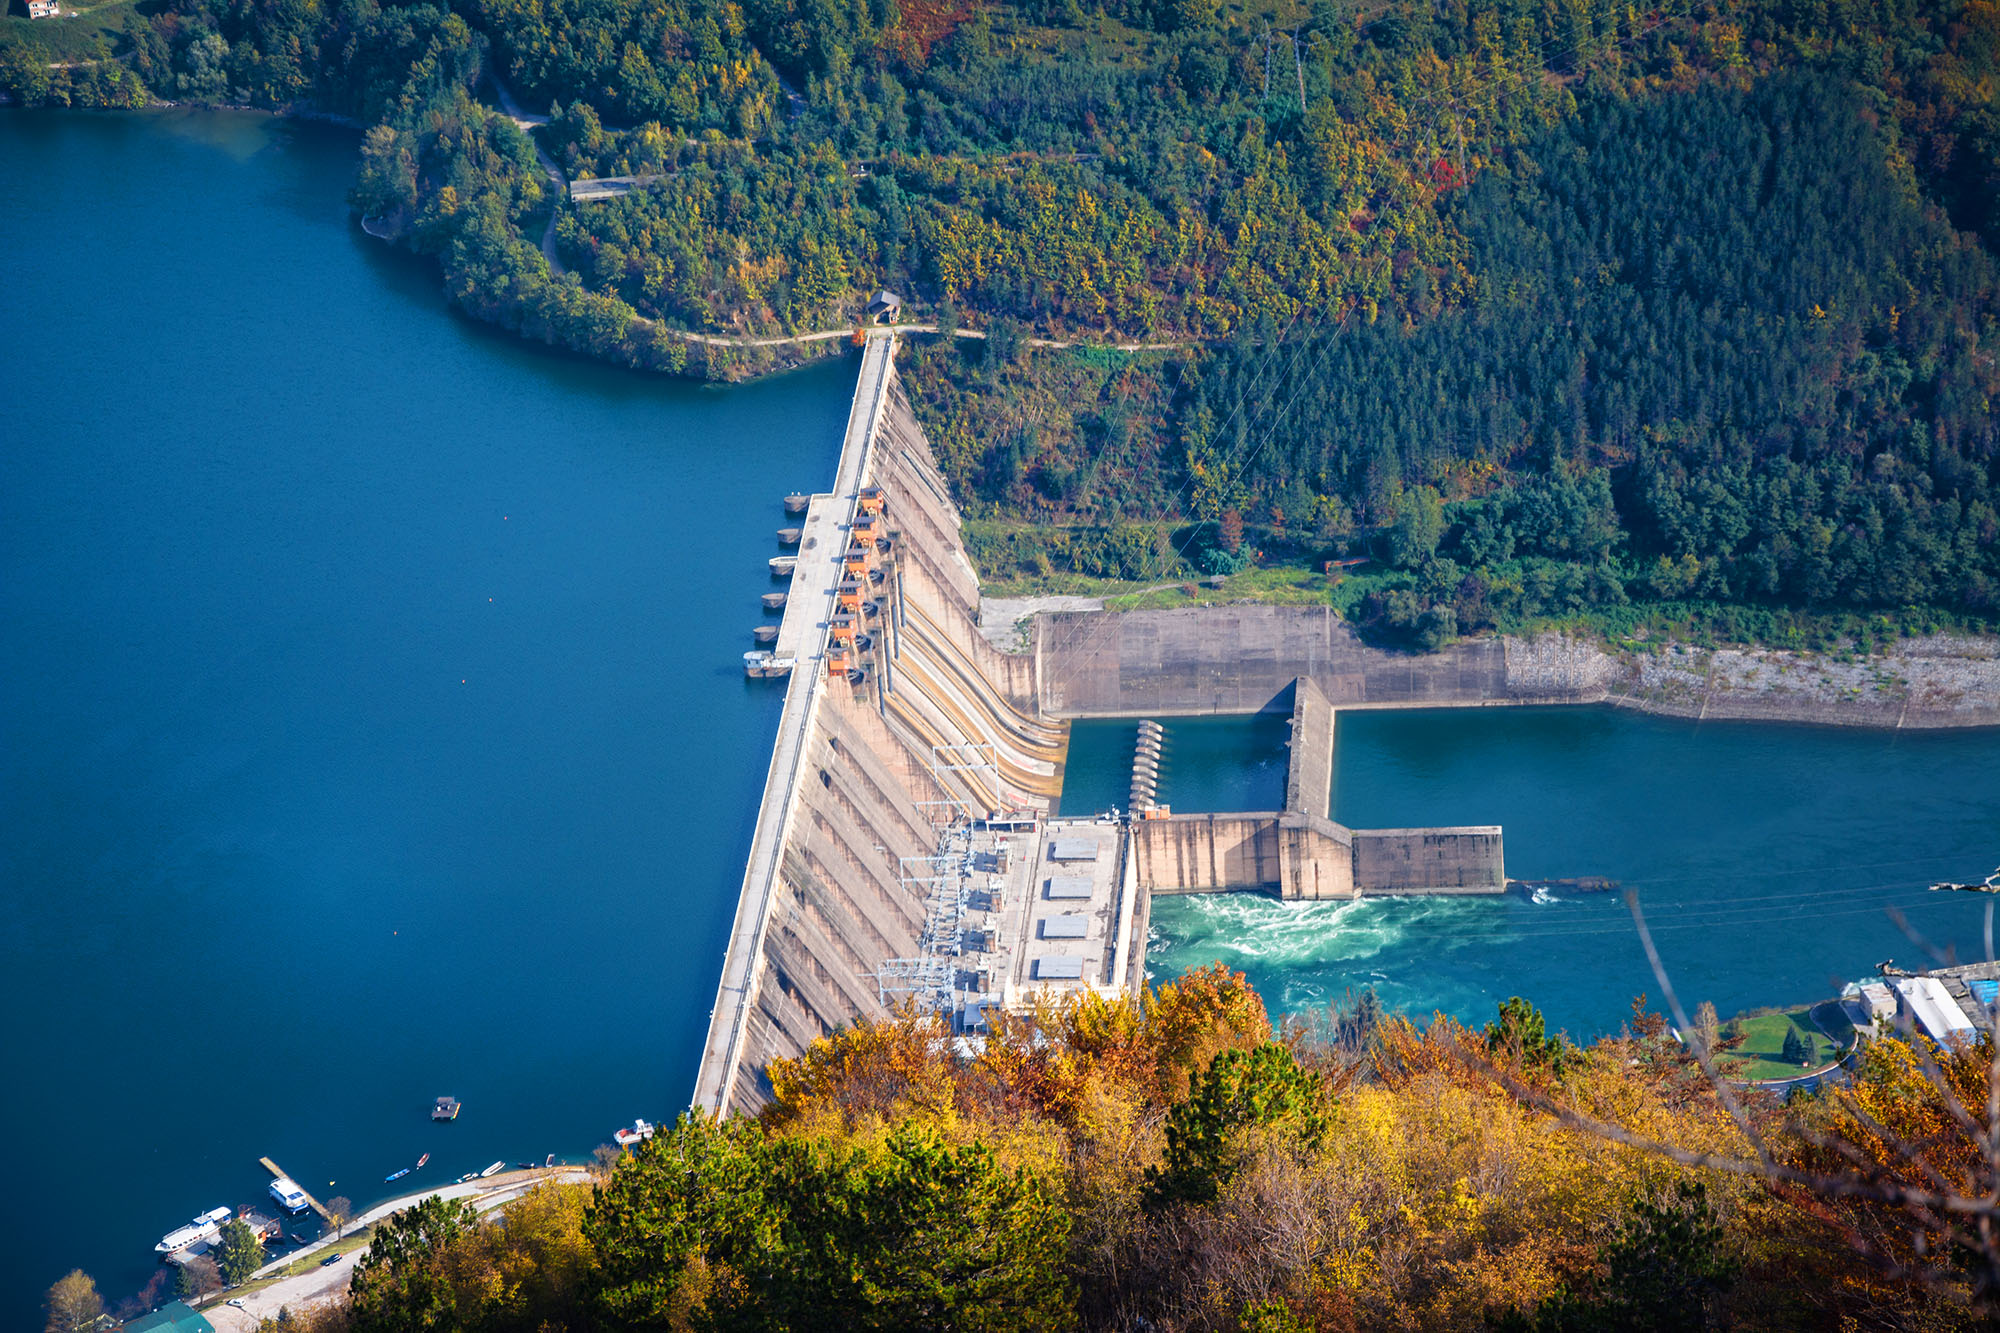 Hydroelectric power plant on river